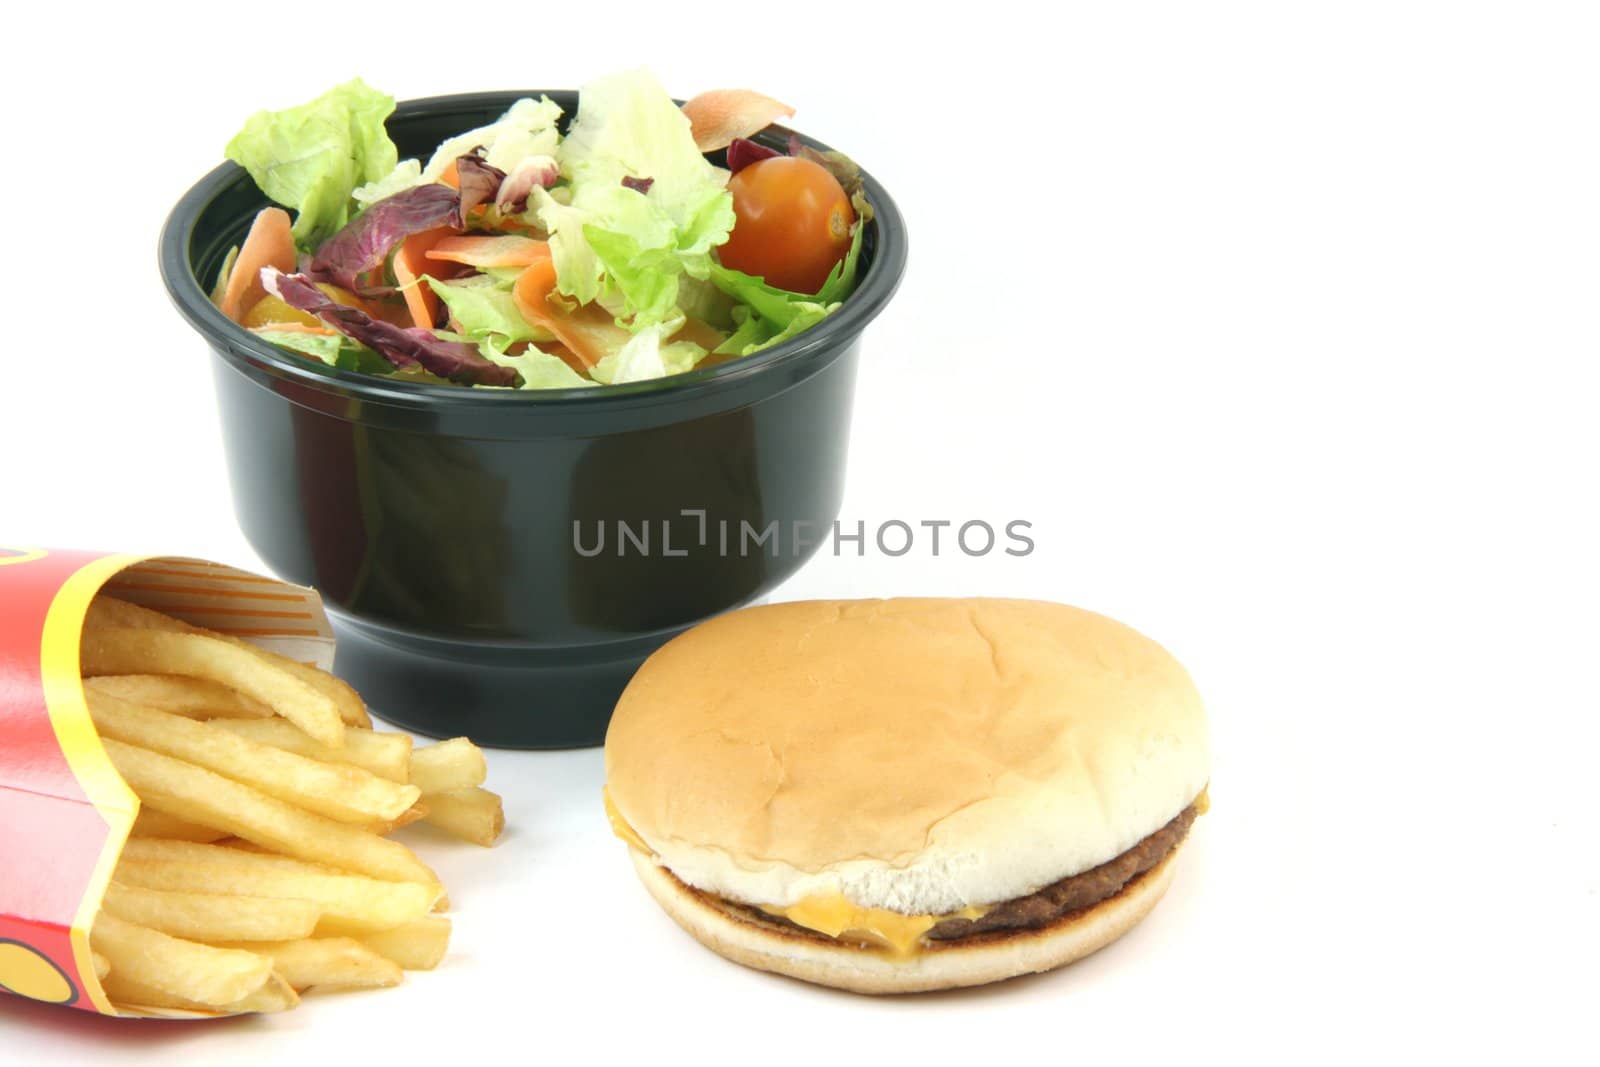 salad cheeseburger and french fries in box isolated on white backround food concepts with copy space